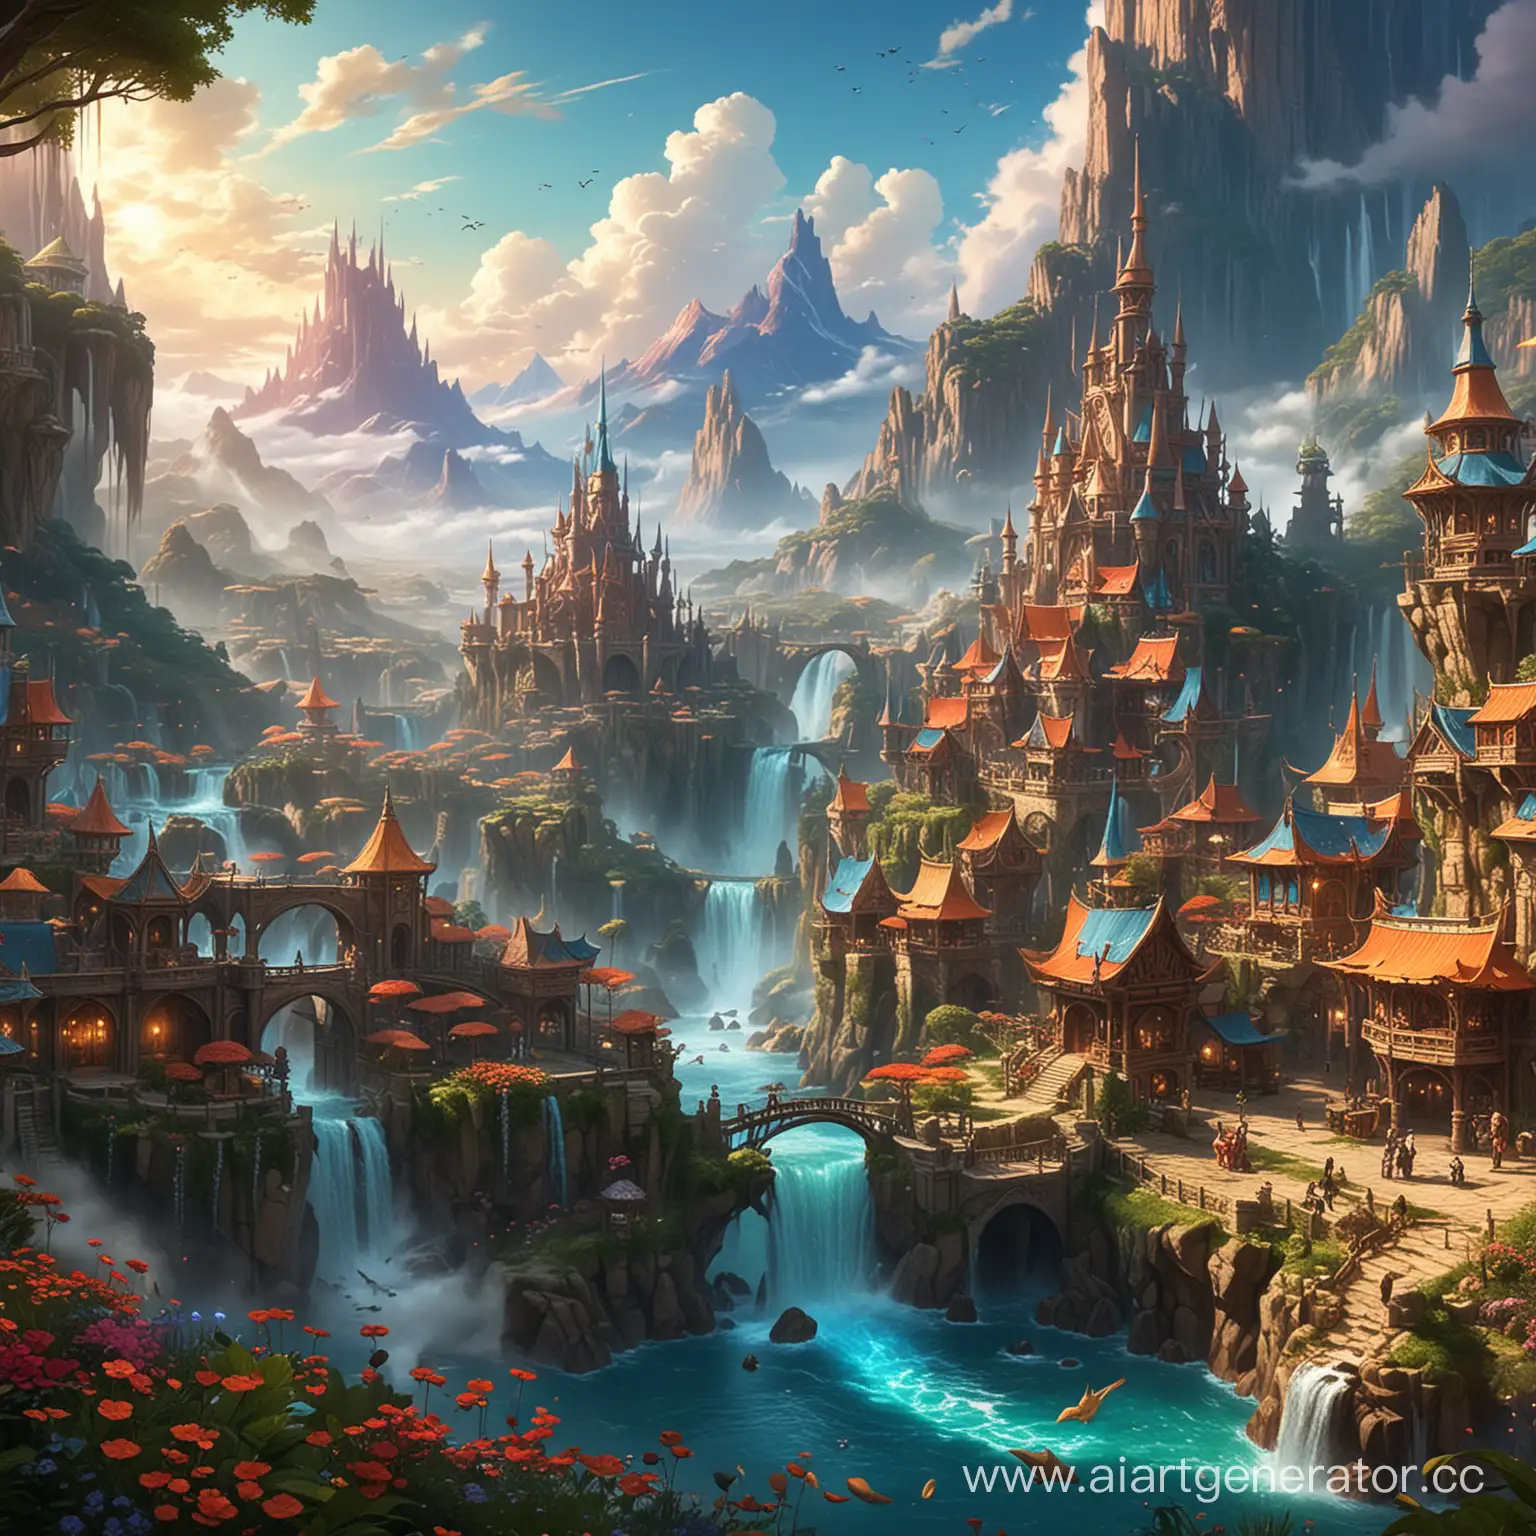 Enchanted-Fantasy-World-with-Mythical-Creatures-and-Magical-Landscapes